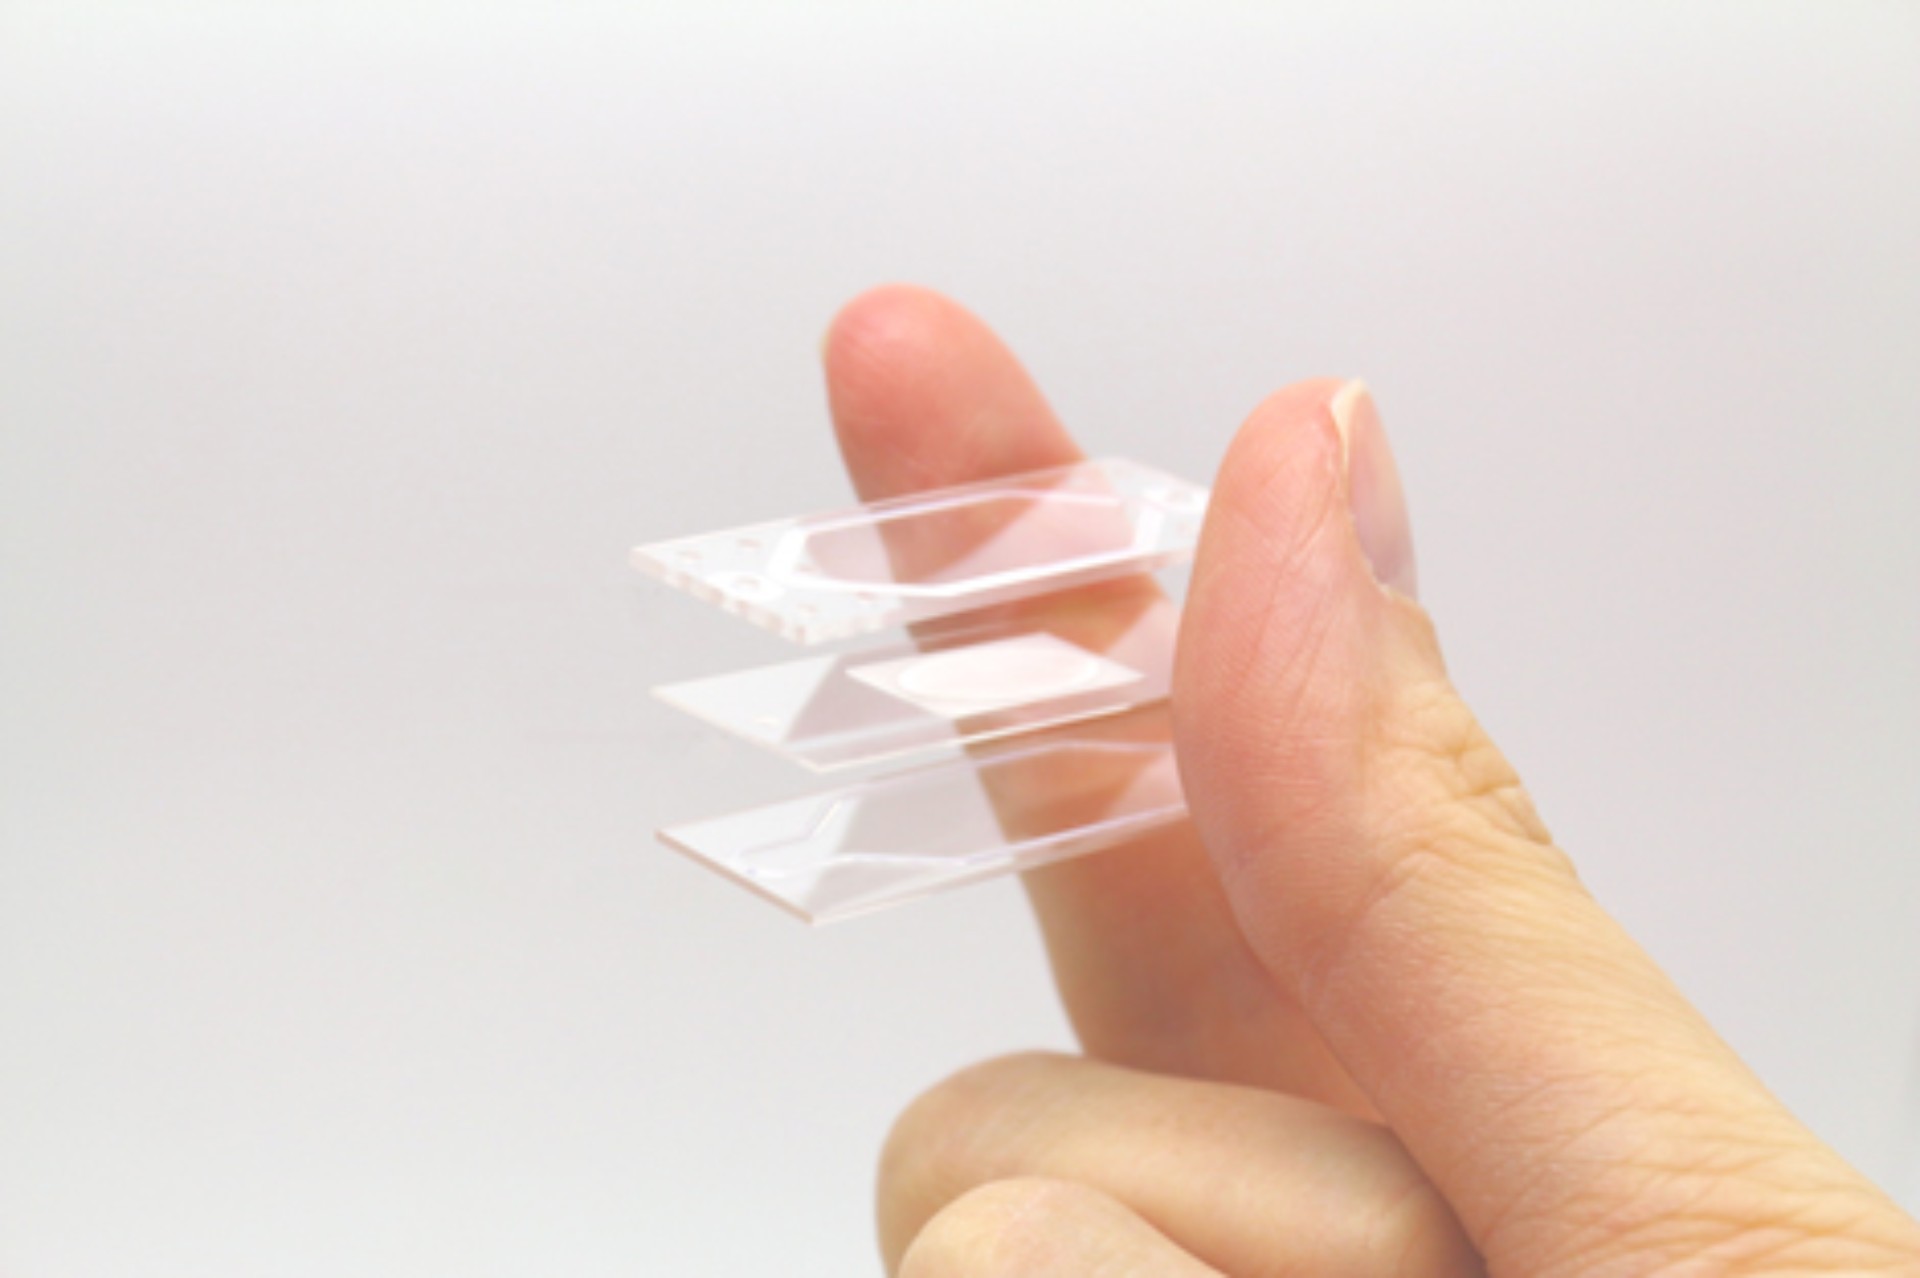 An Organ-on-Chip consisting of three layers